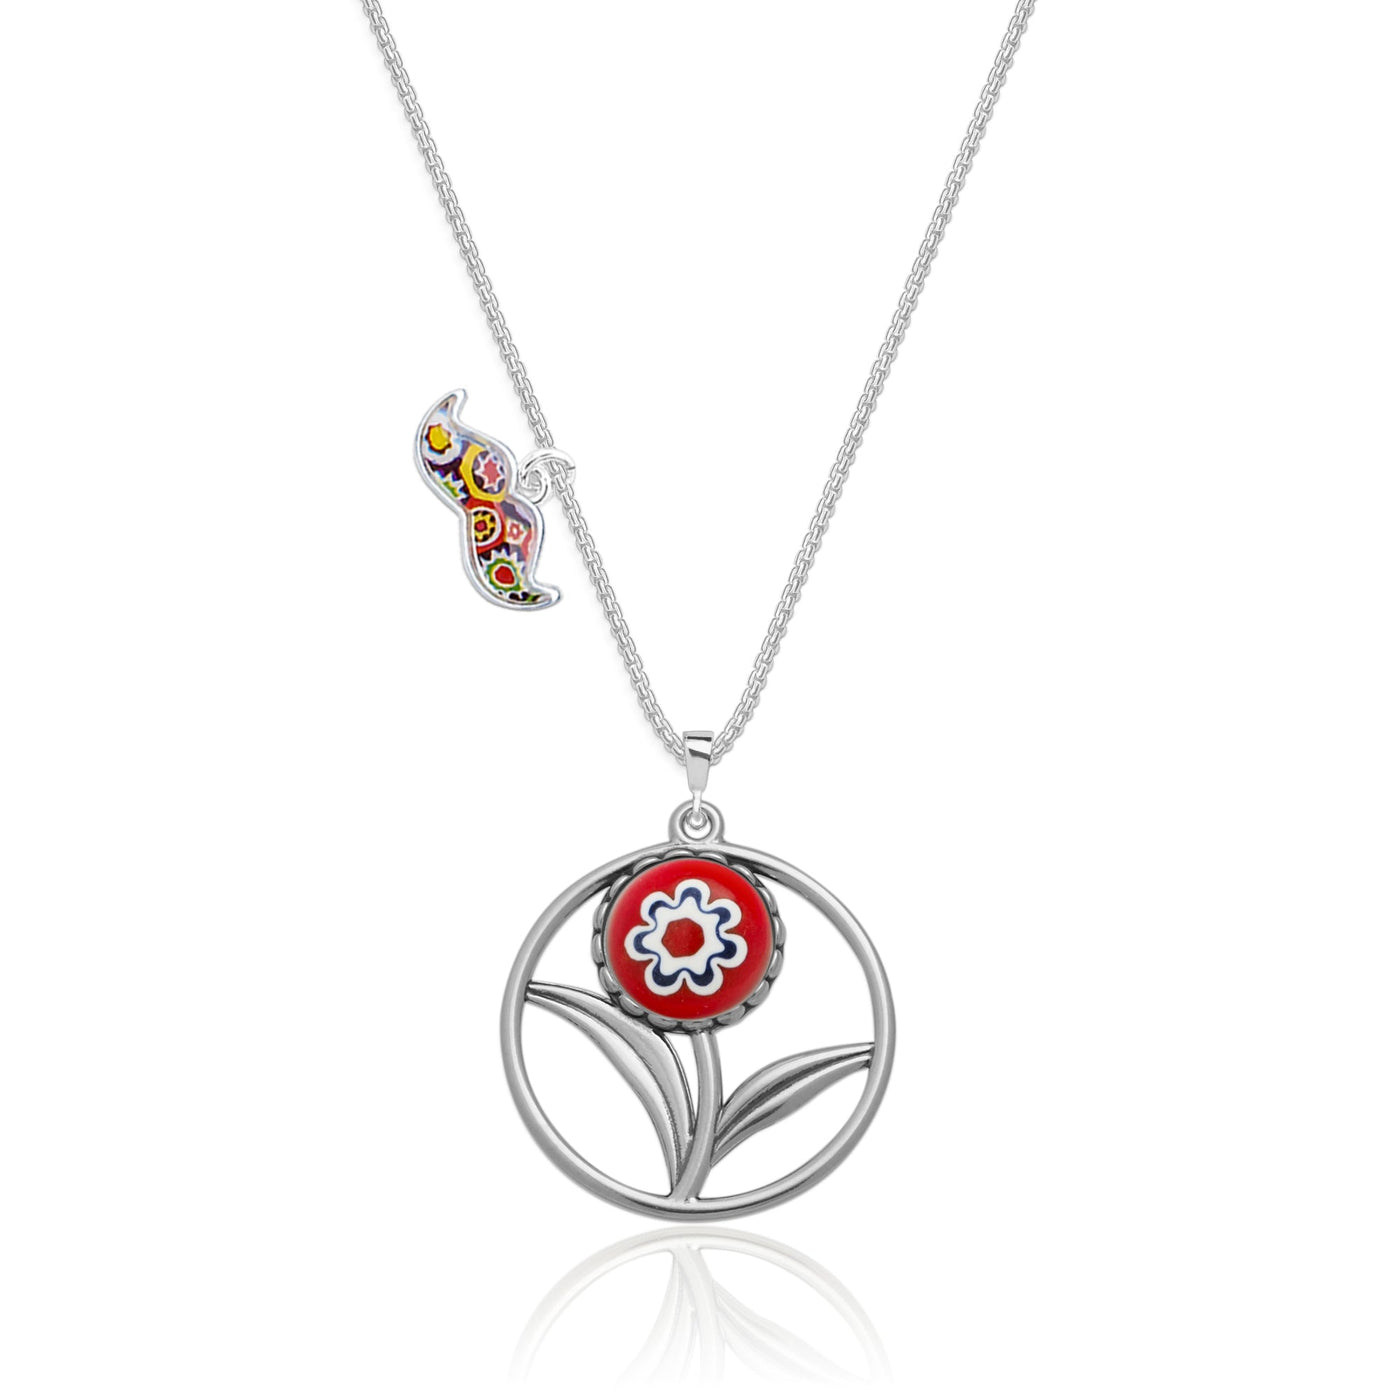 A Flower in Bloom Necklace - Red Flower - Pendant Necklace